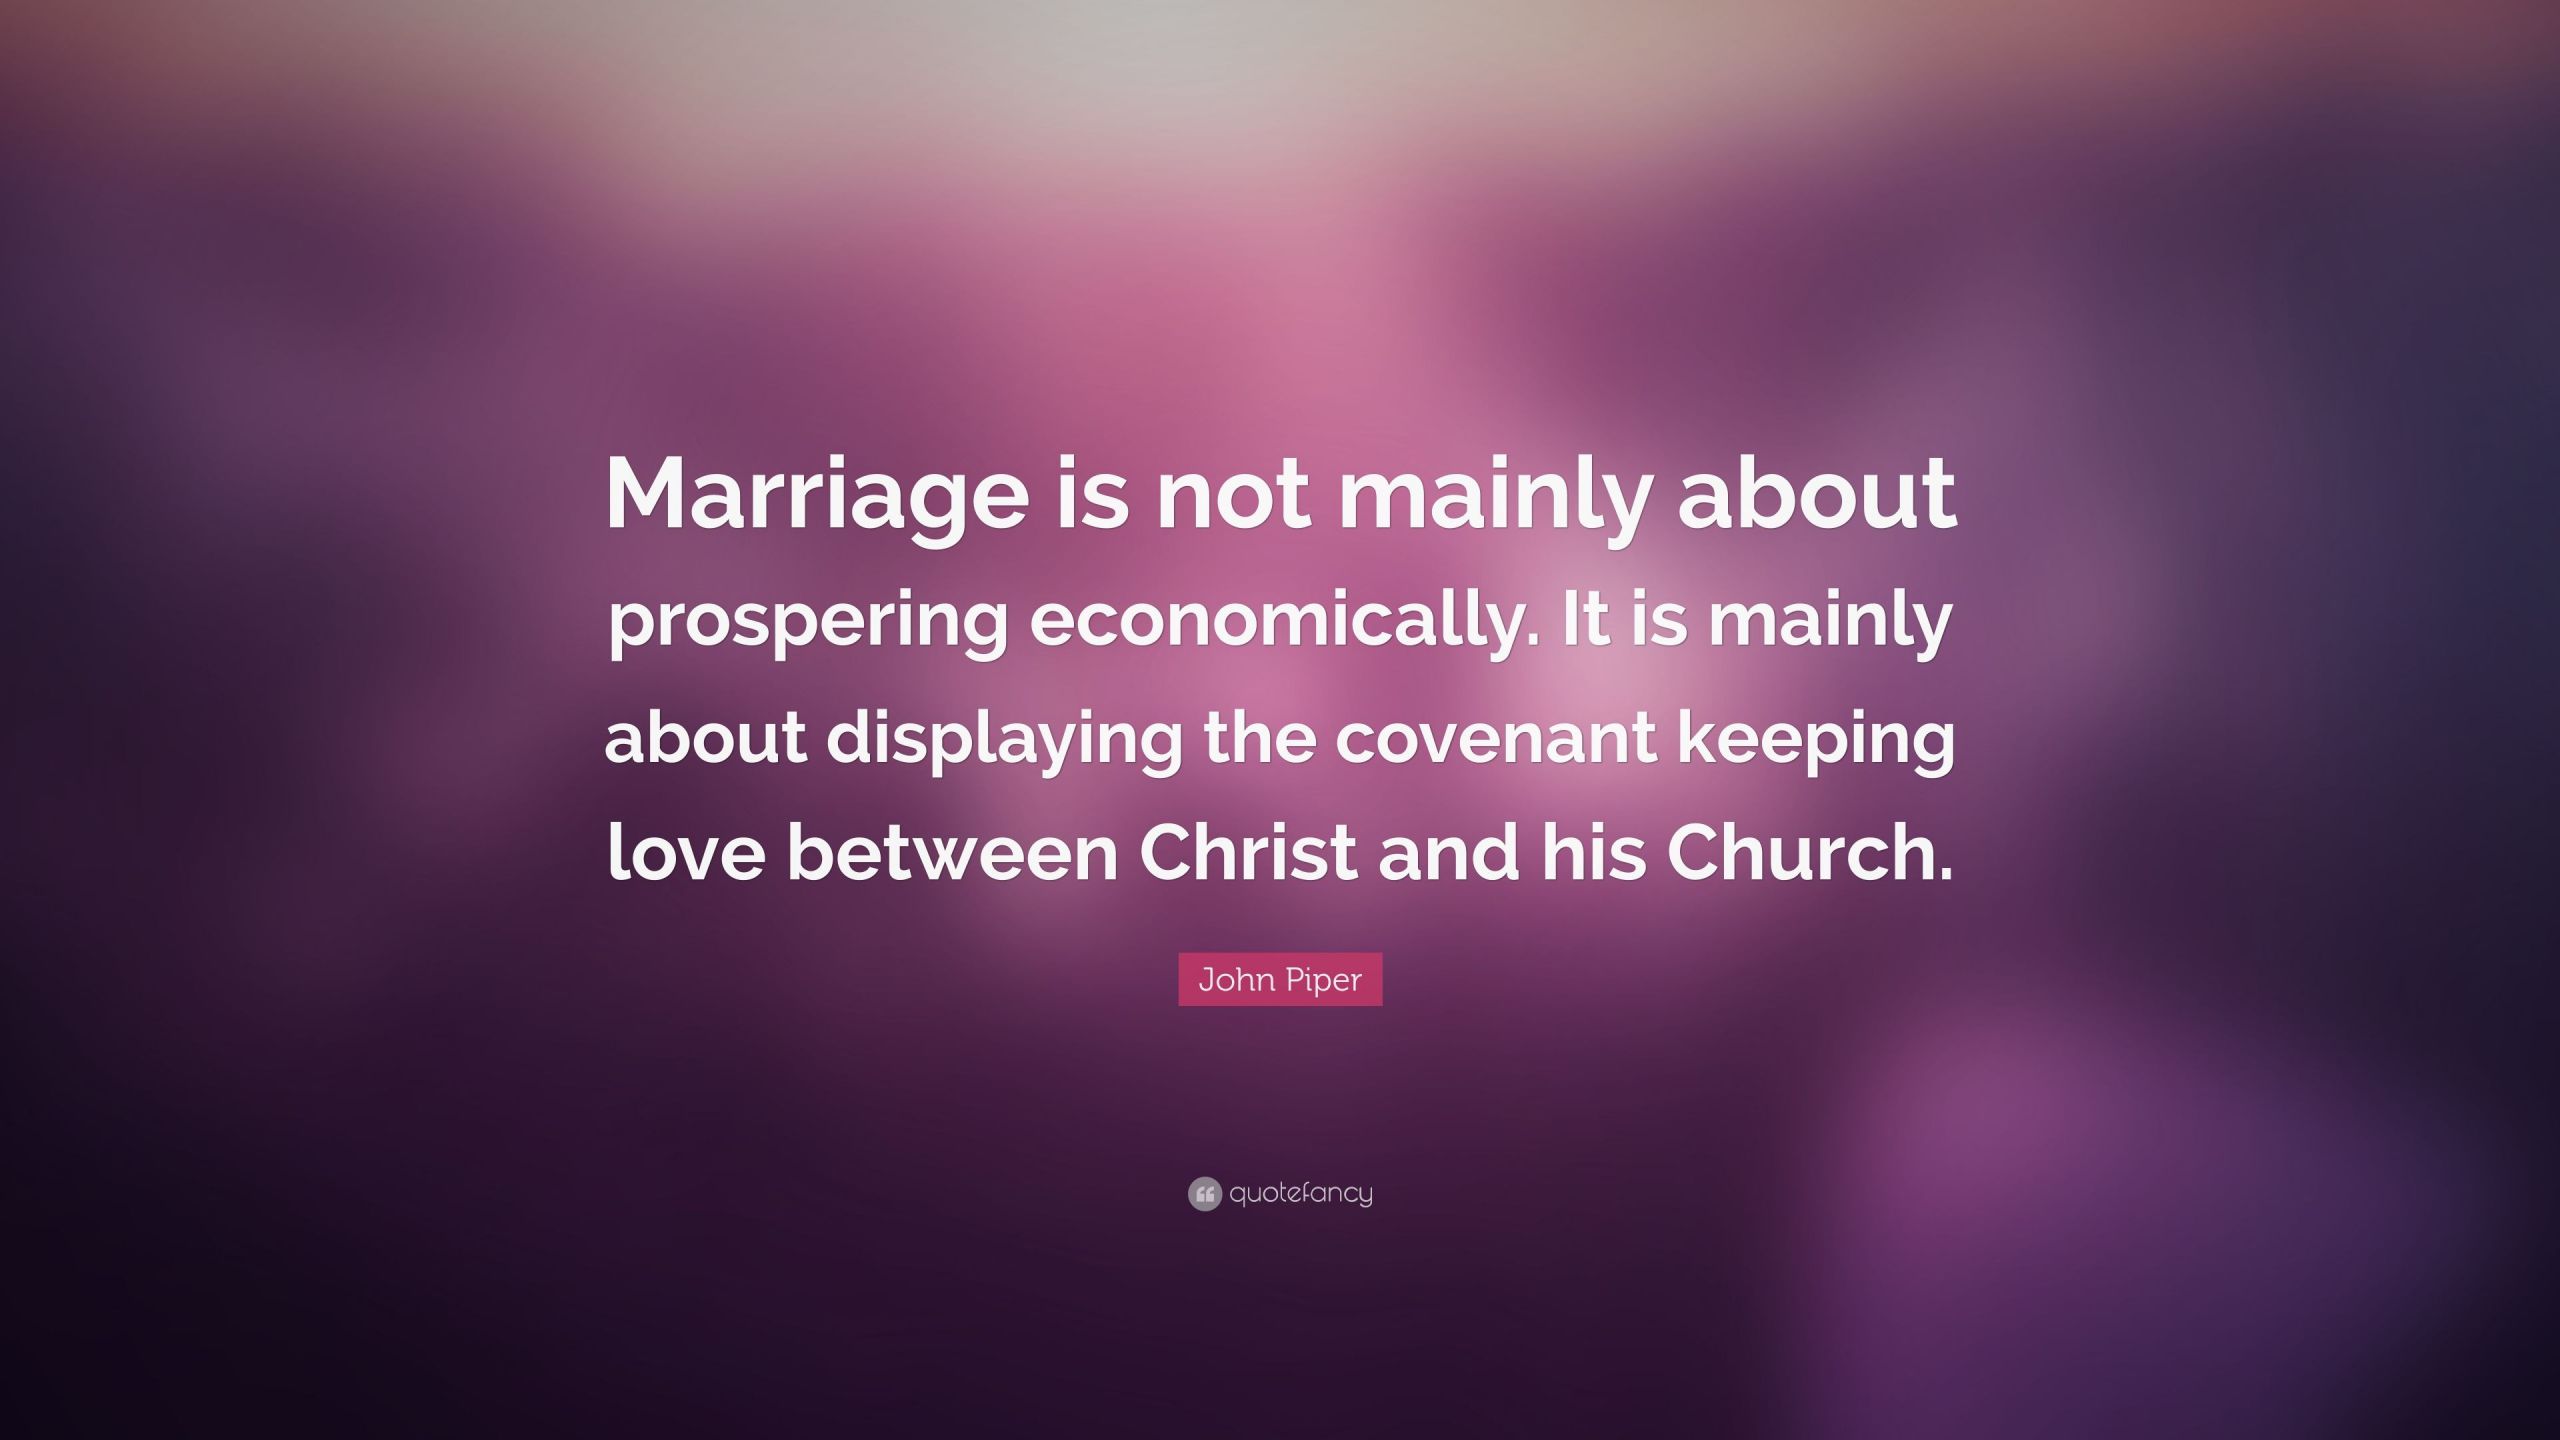 John Piper Marriage Quote
 John Piper Quote “Marriage is not mainly about prospering